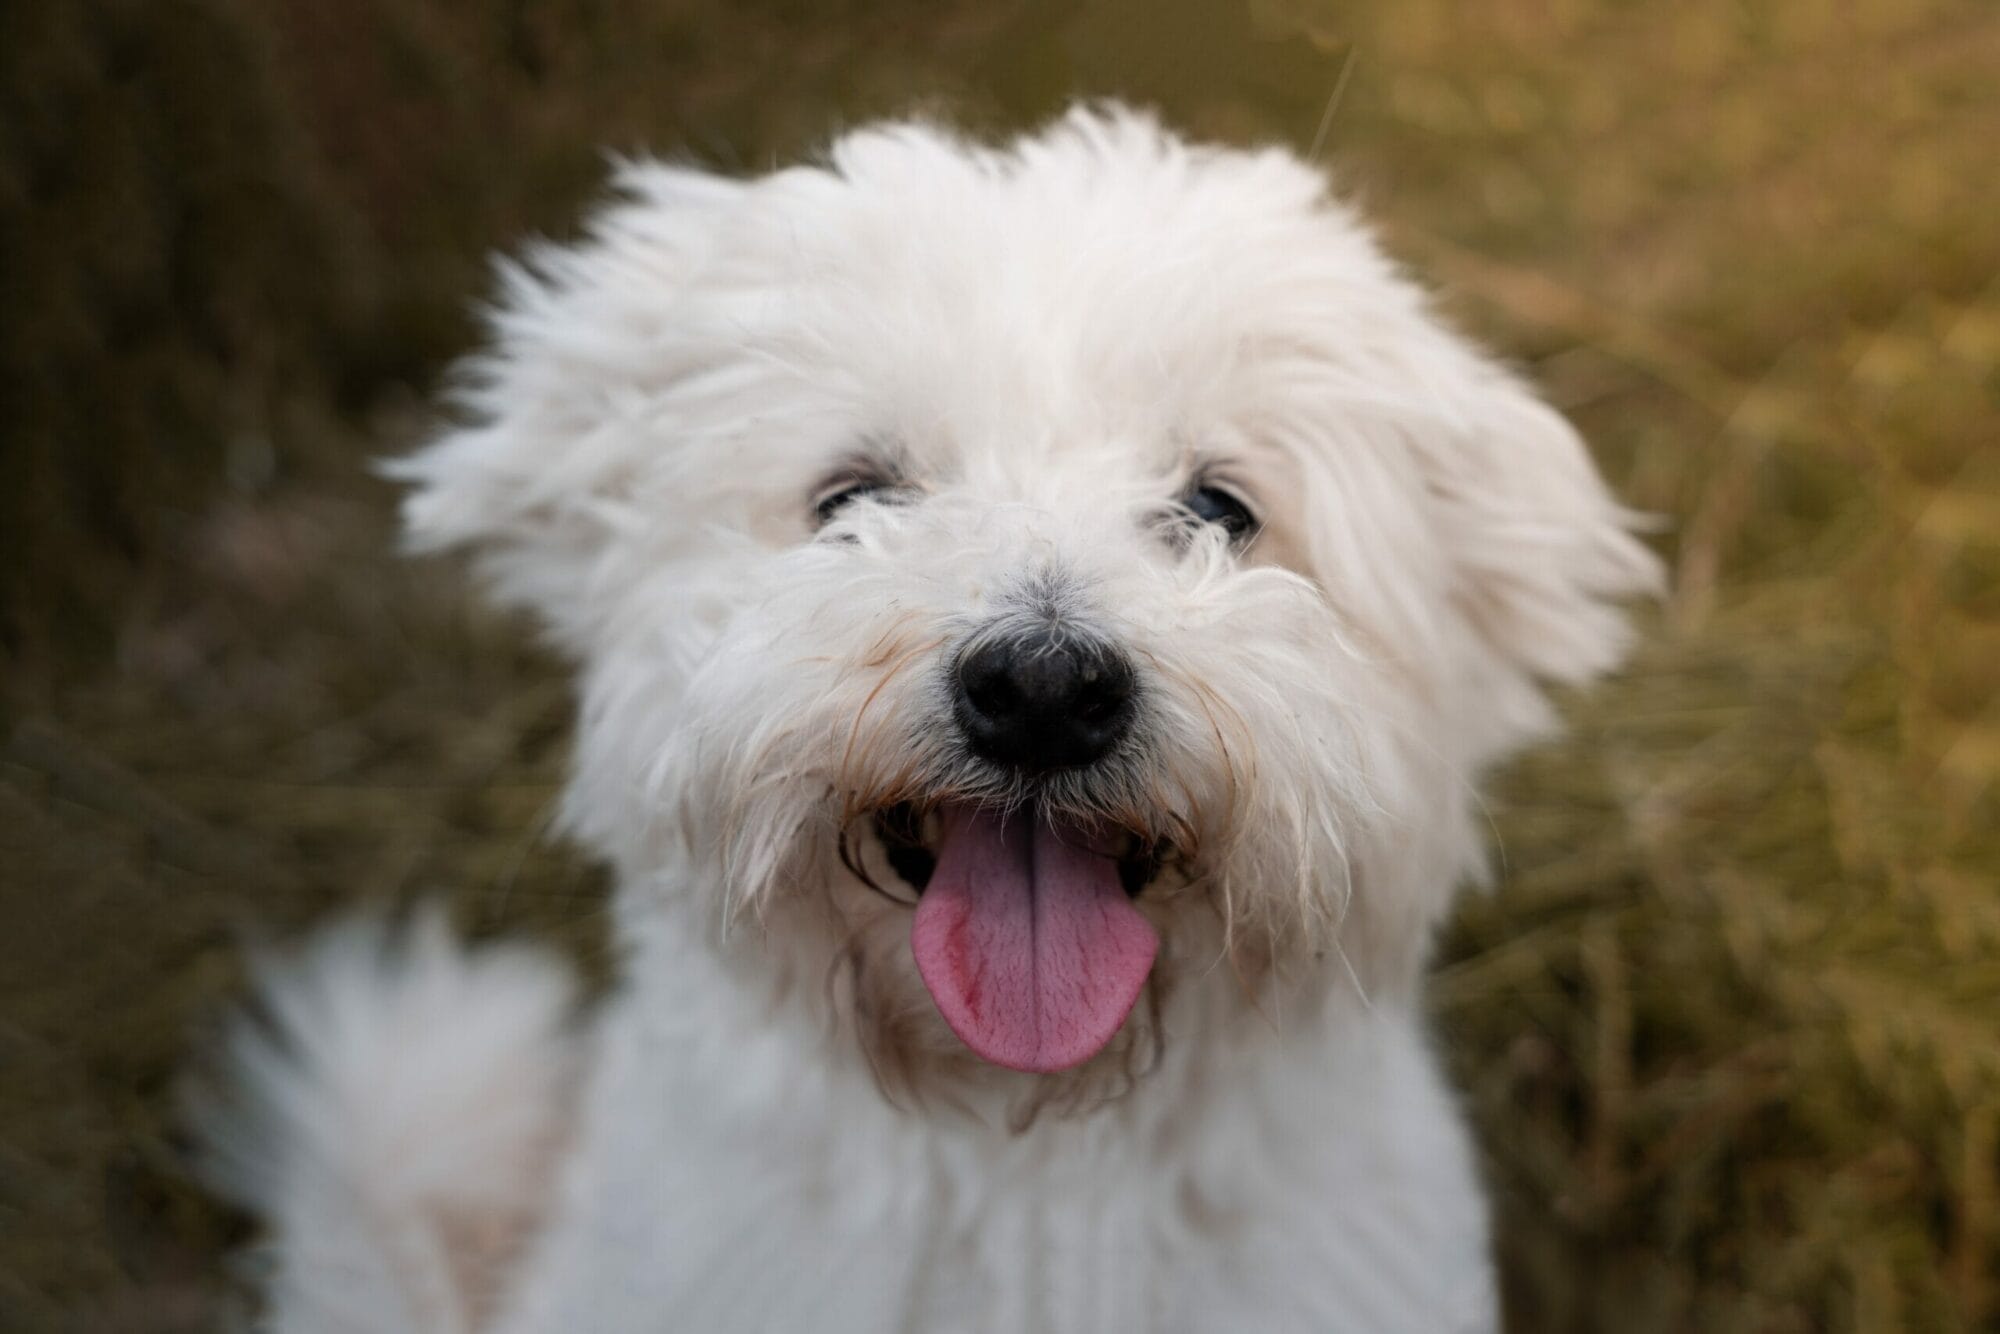 Small white fluffy dog with mouth open and tongue out at the camera